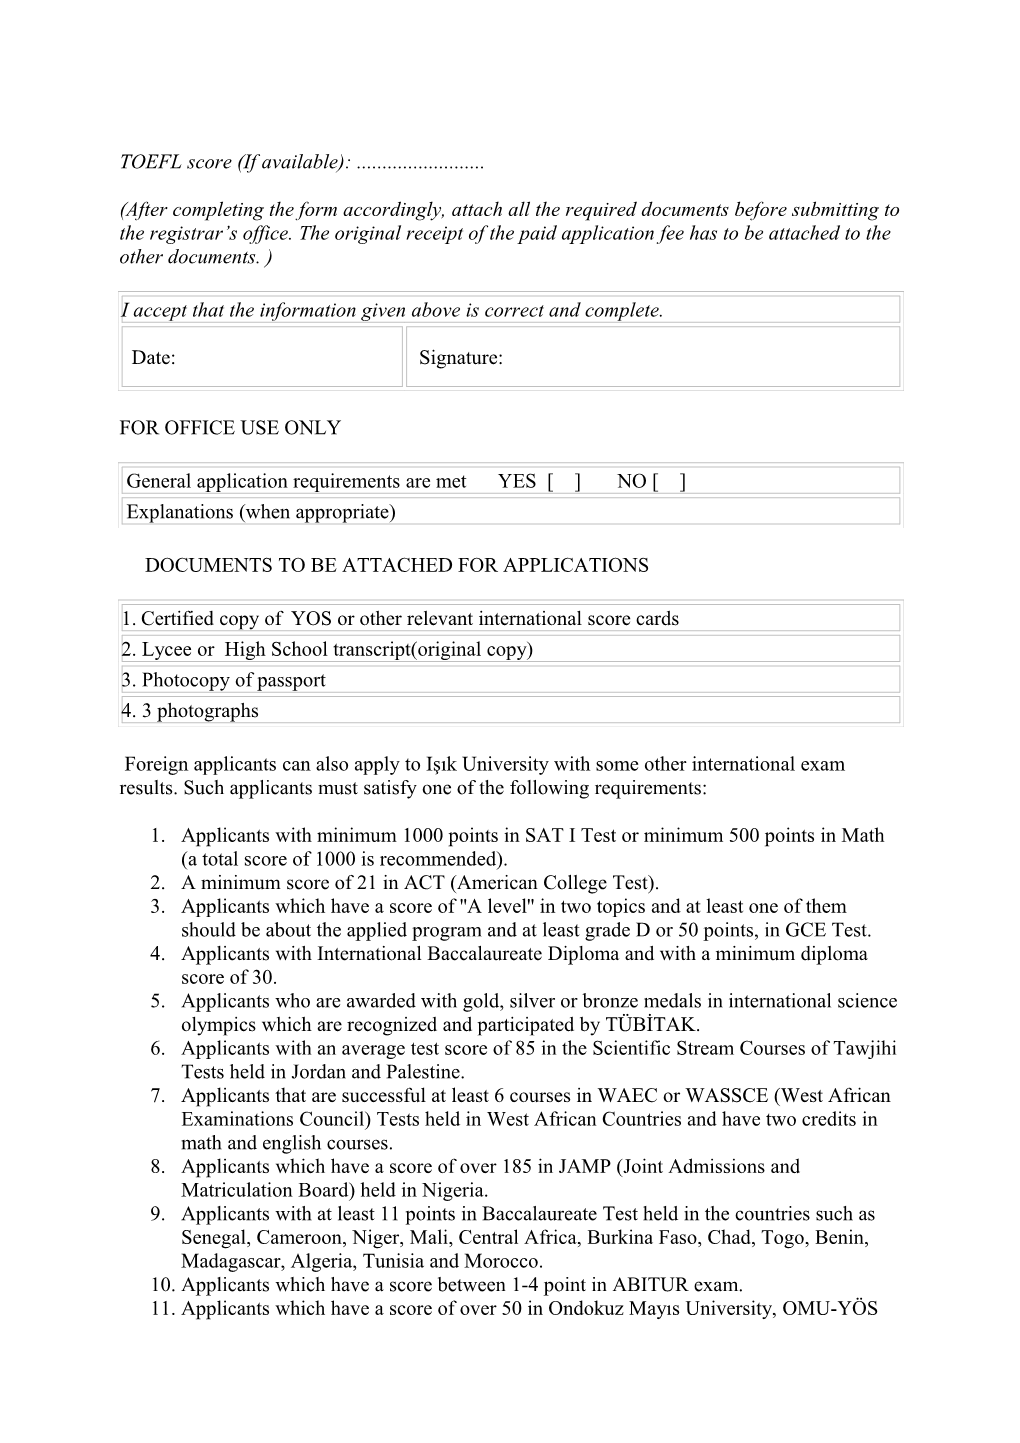 Isik University Foreign Students Application Form